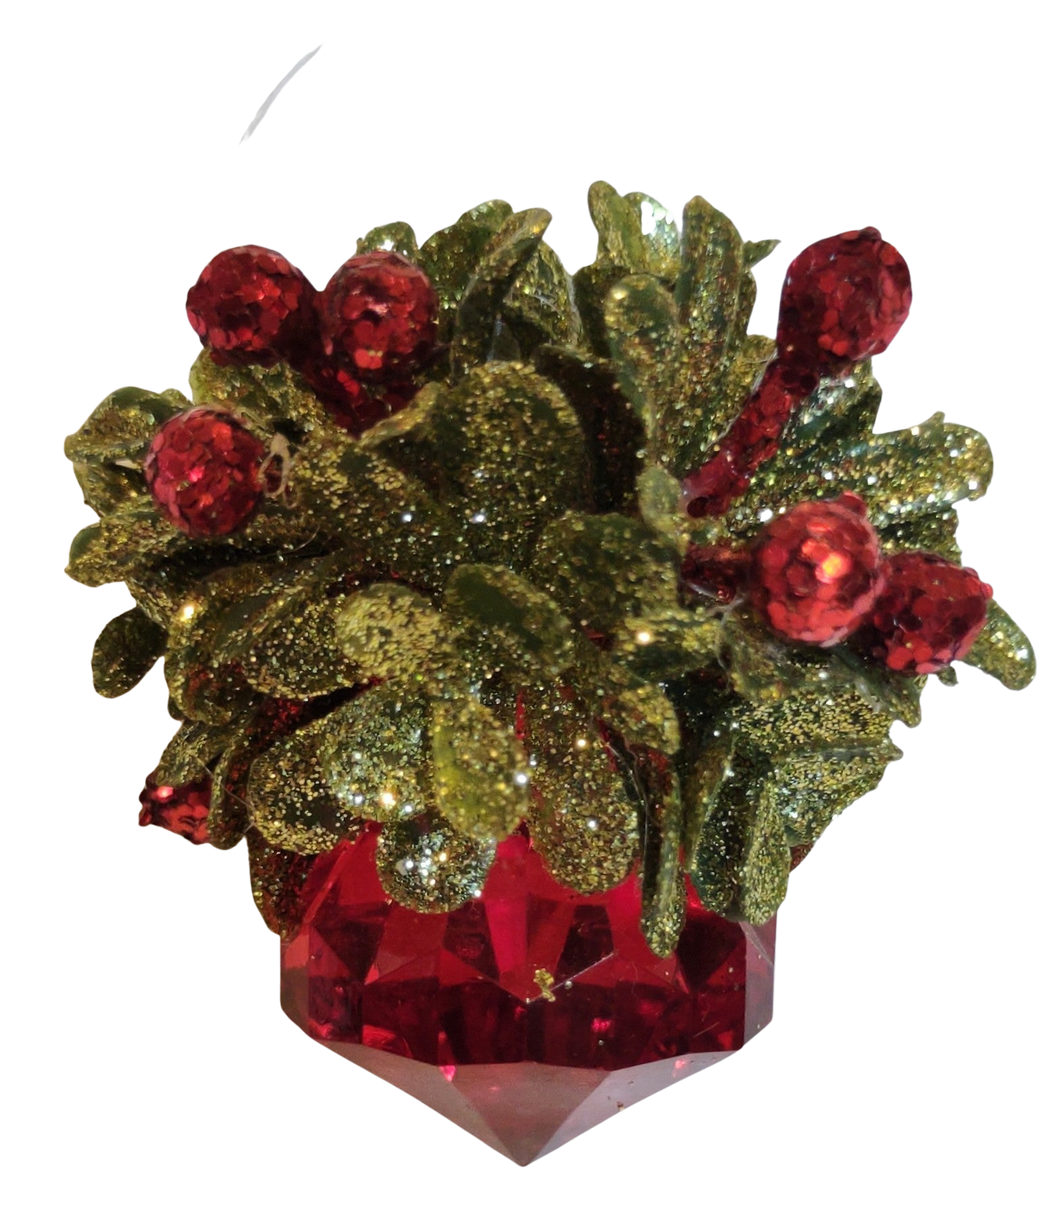 Acrylic Red Crystal Ornament with Greenery & Red Berries 2.5